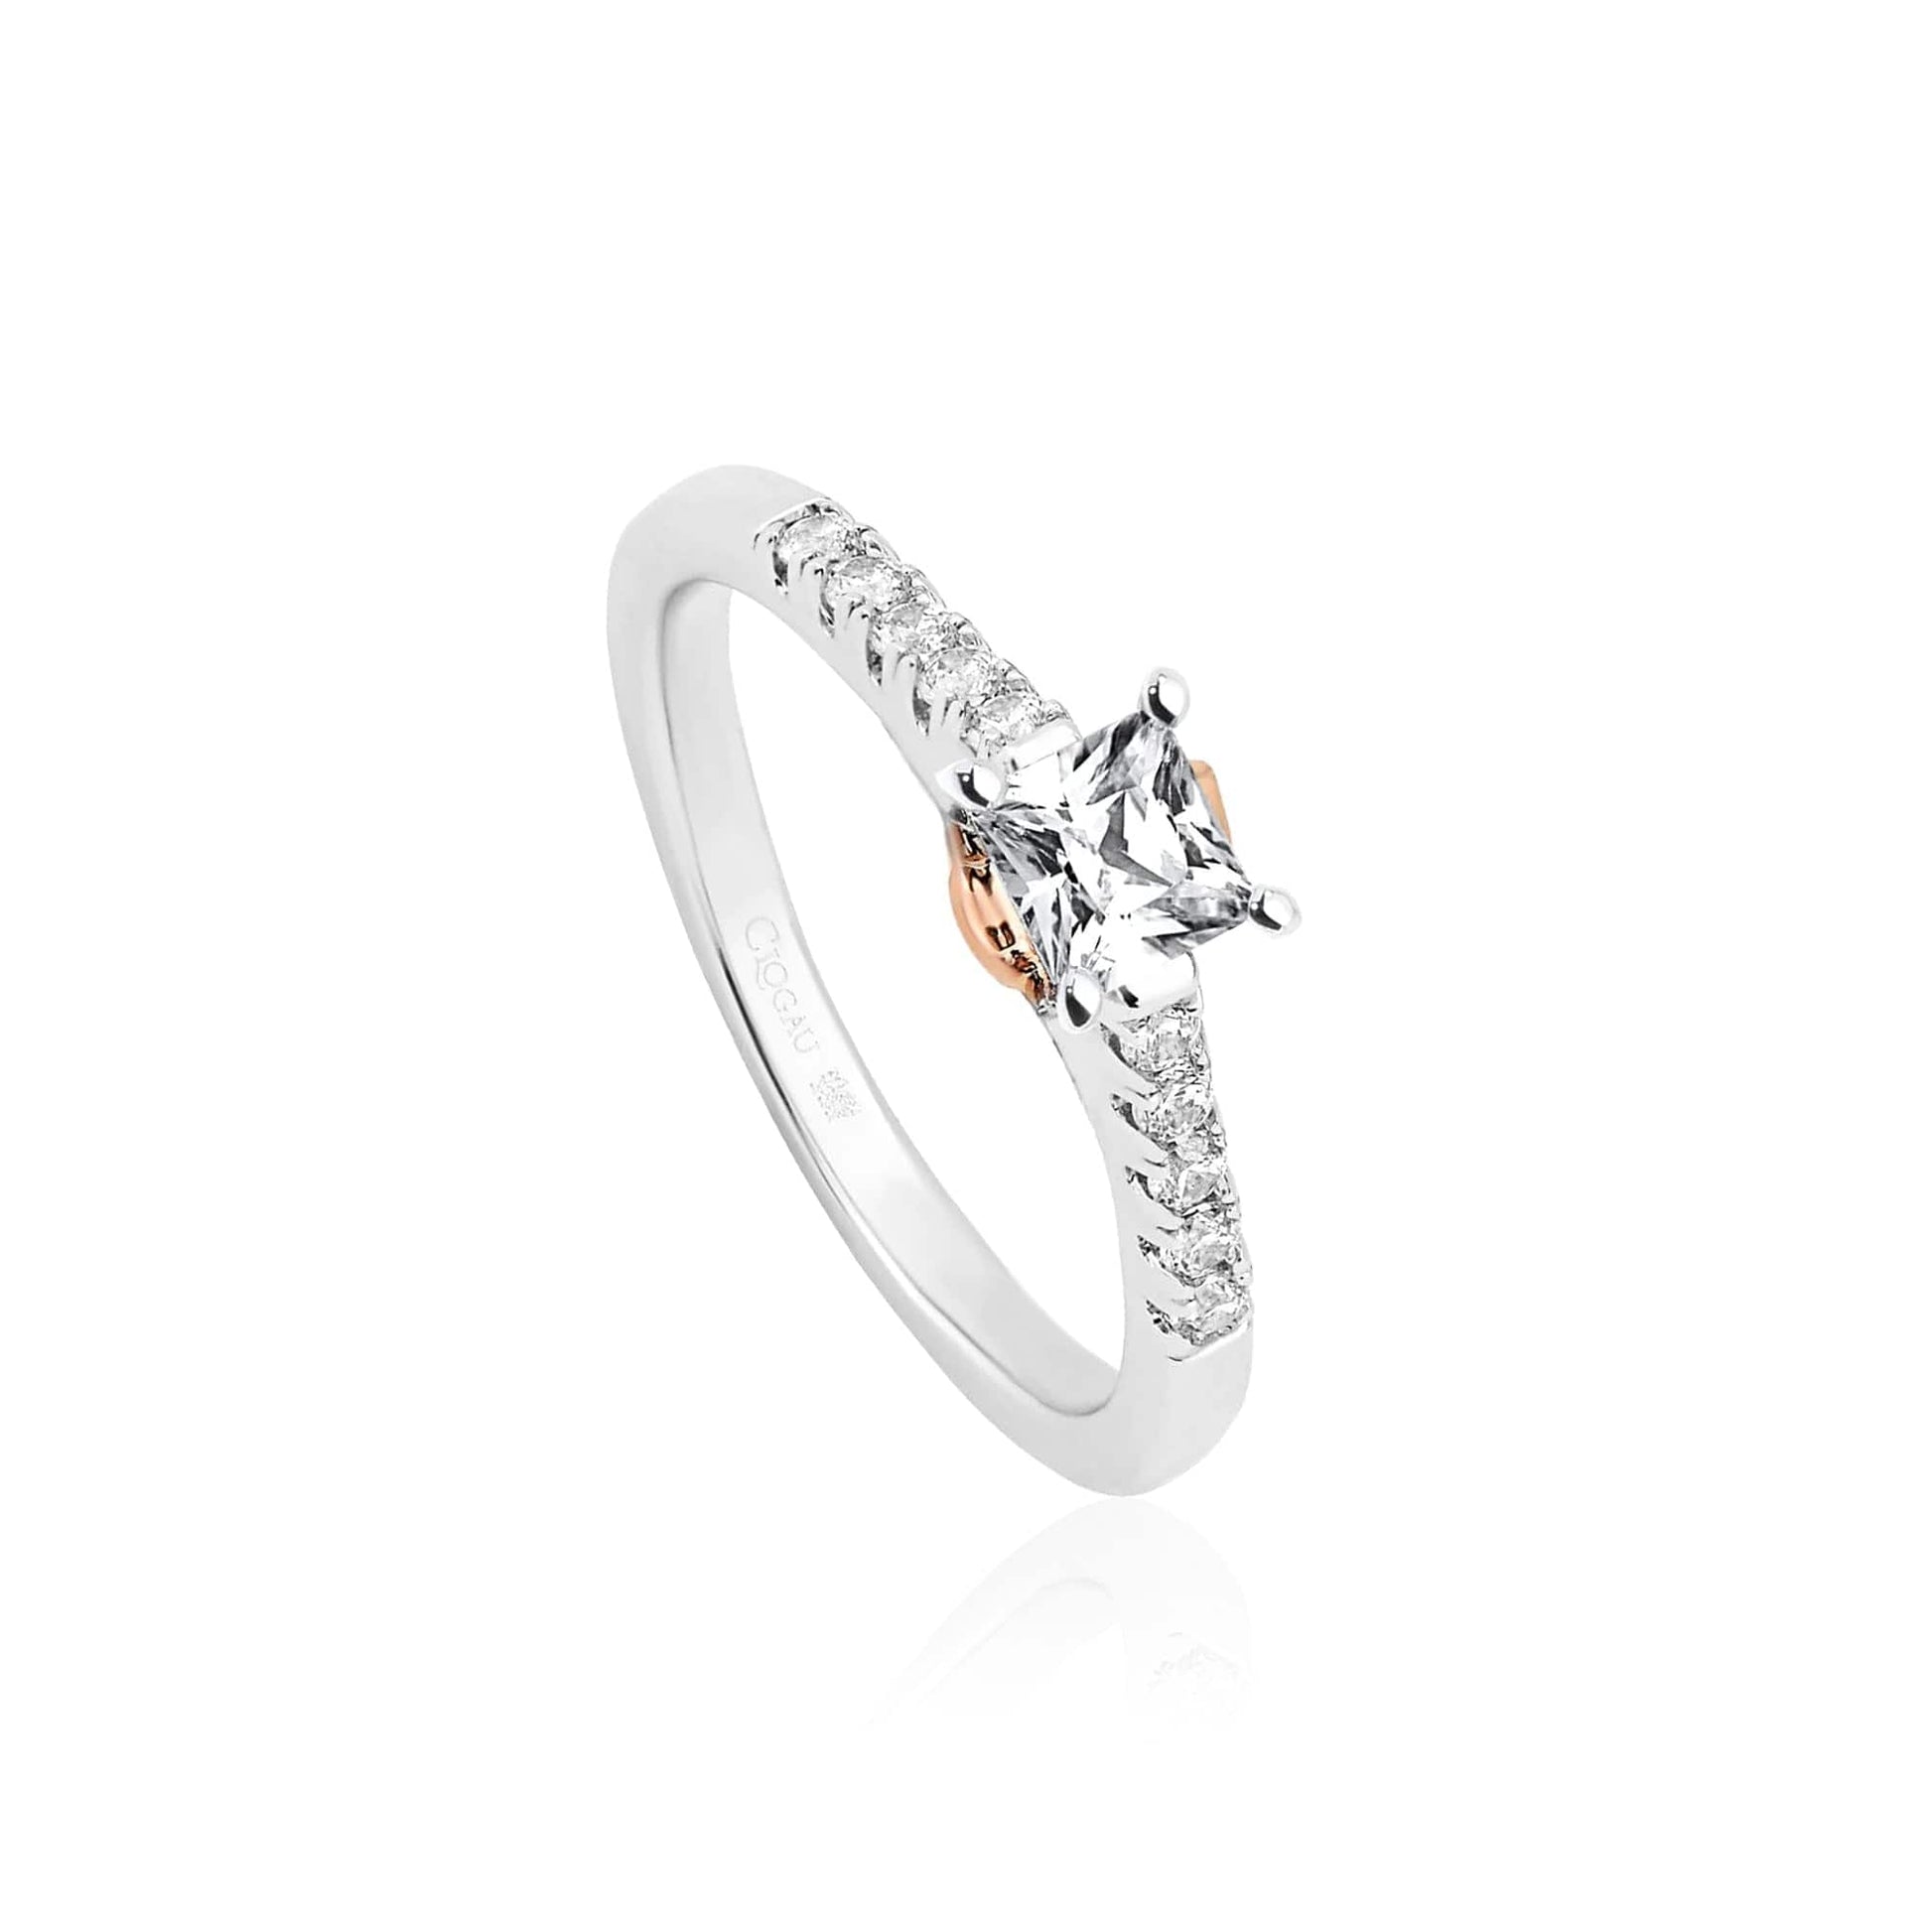 9ct White Gold Timeless Love Engagement Ring with 0.3ct Princess Cut Diamond